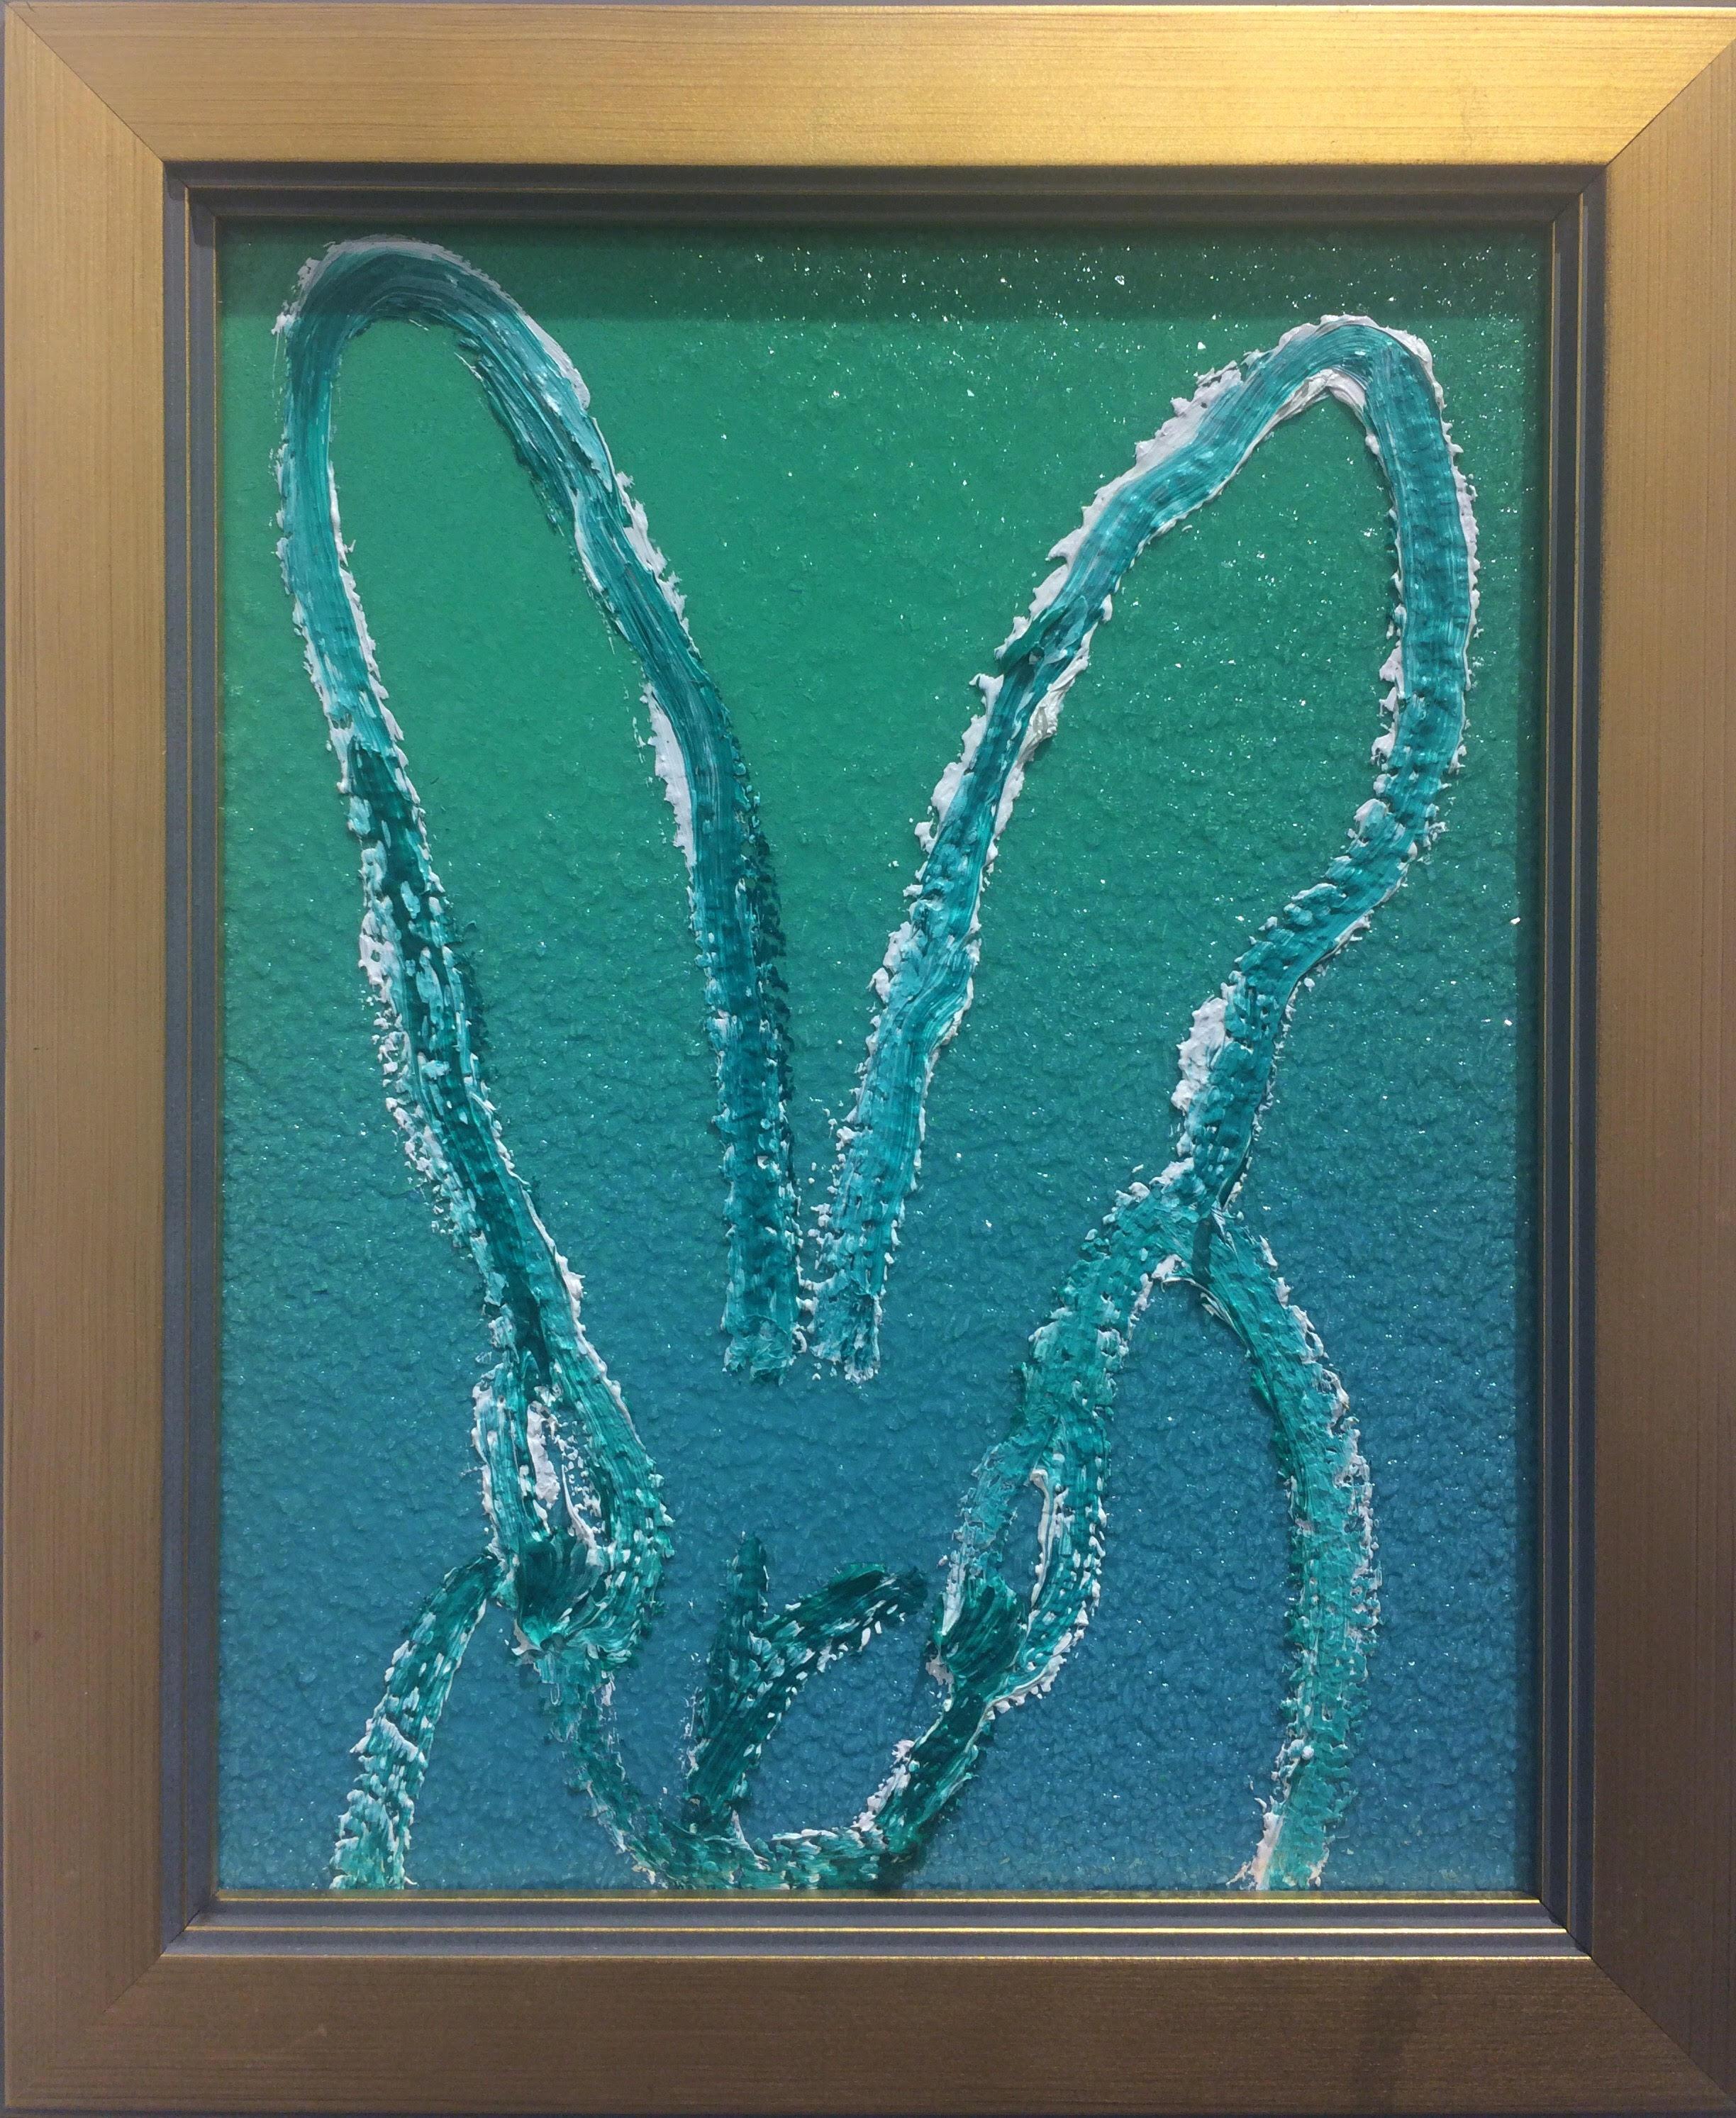 Hunt Slonem "Ever Song I", Oil and Diamond Dust Bunny Painting on Board, 2019